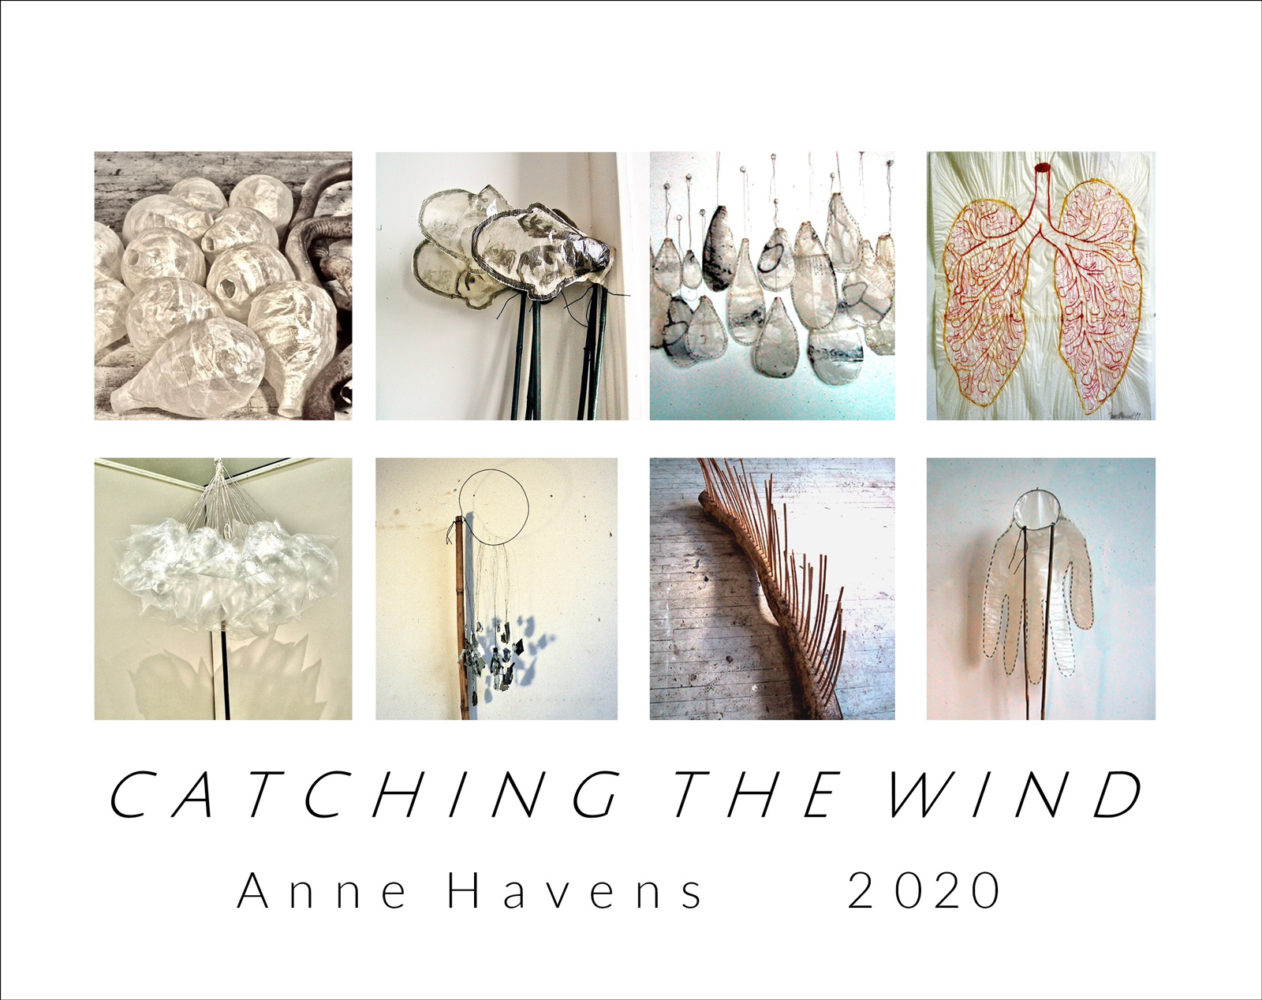 Cover of Anne Havens "Catching the Wind" 2020